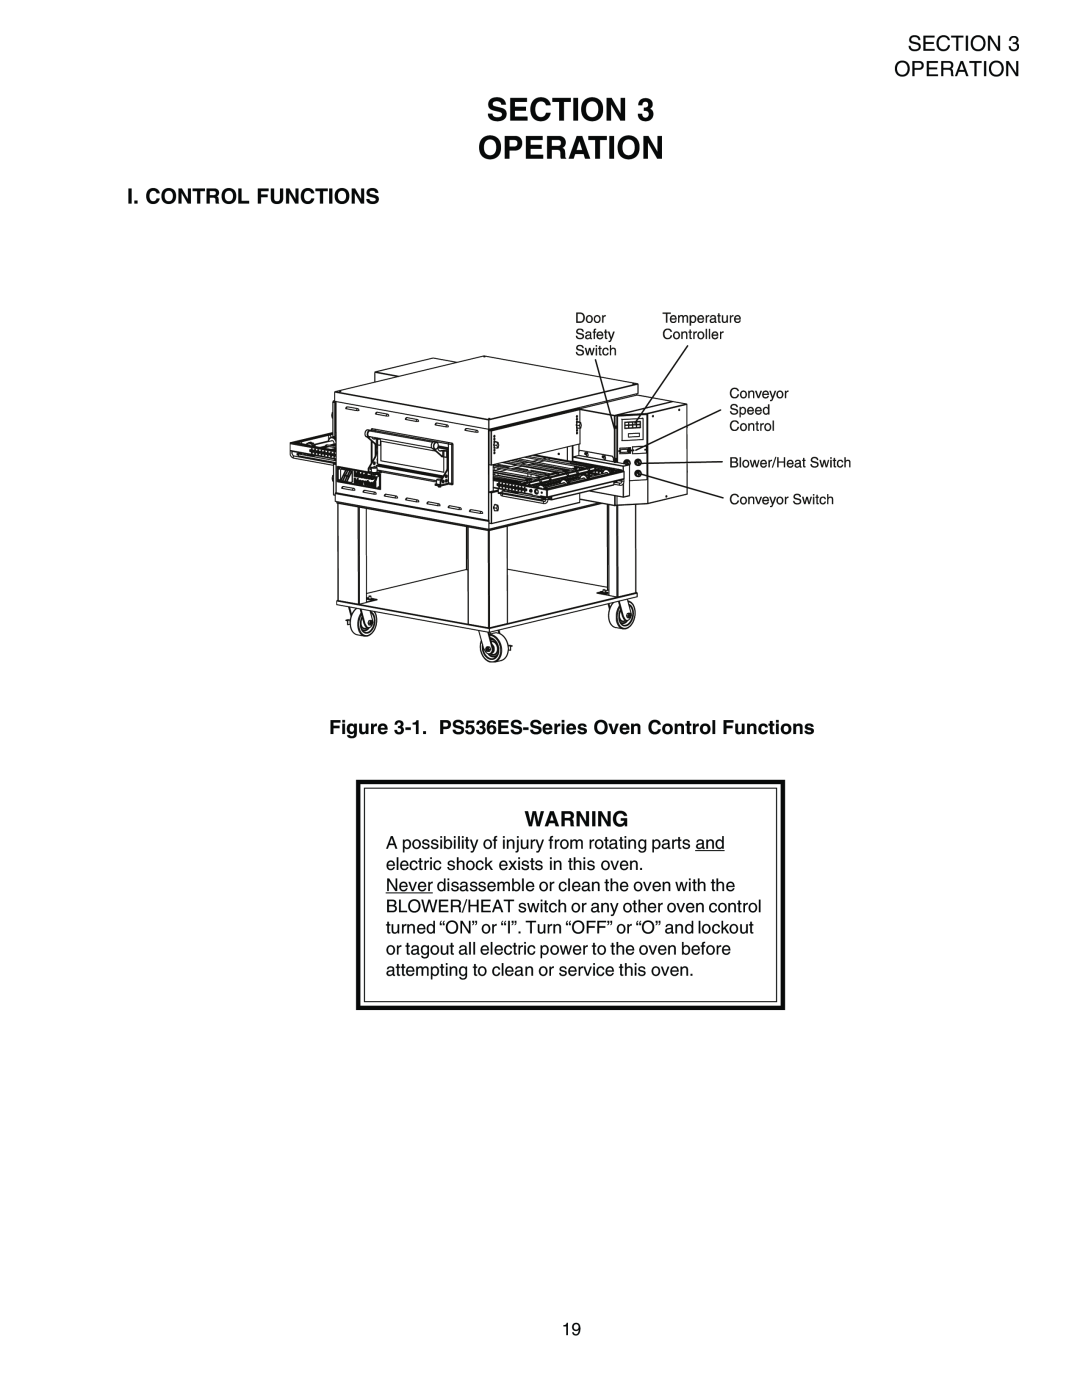 Middleby Marshall installation manual Section Operation, I. Control Functions, 1. PS536ES-Series Oven Control Functions 